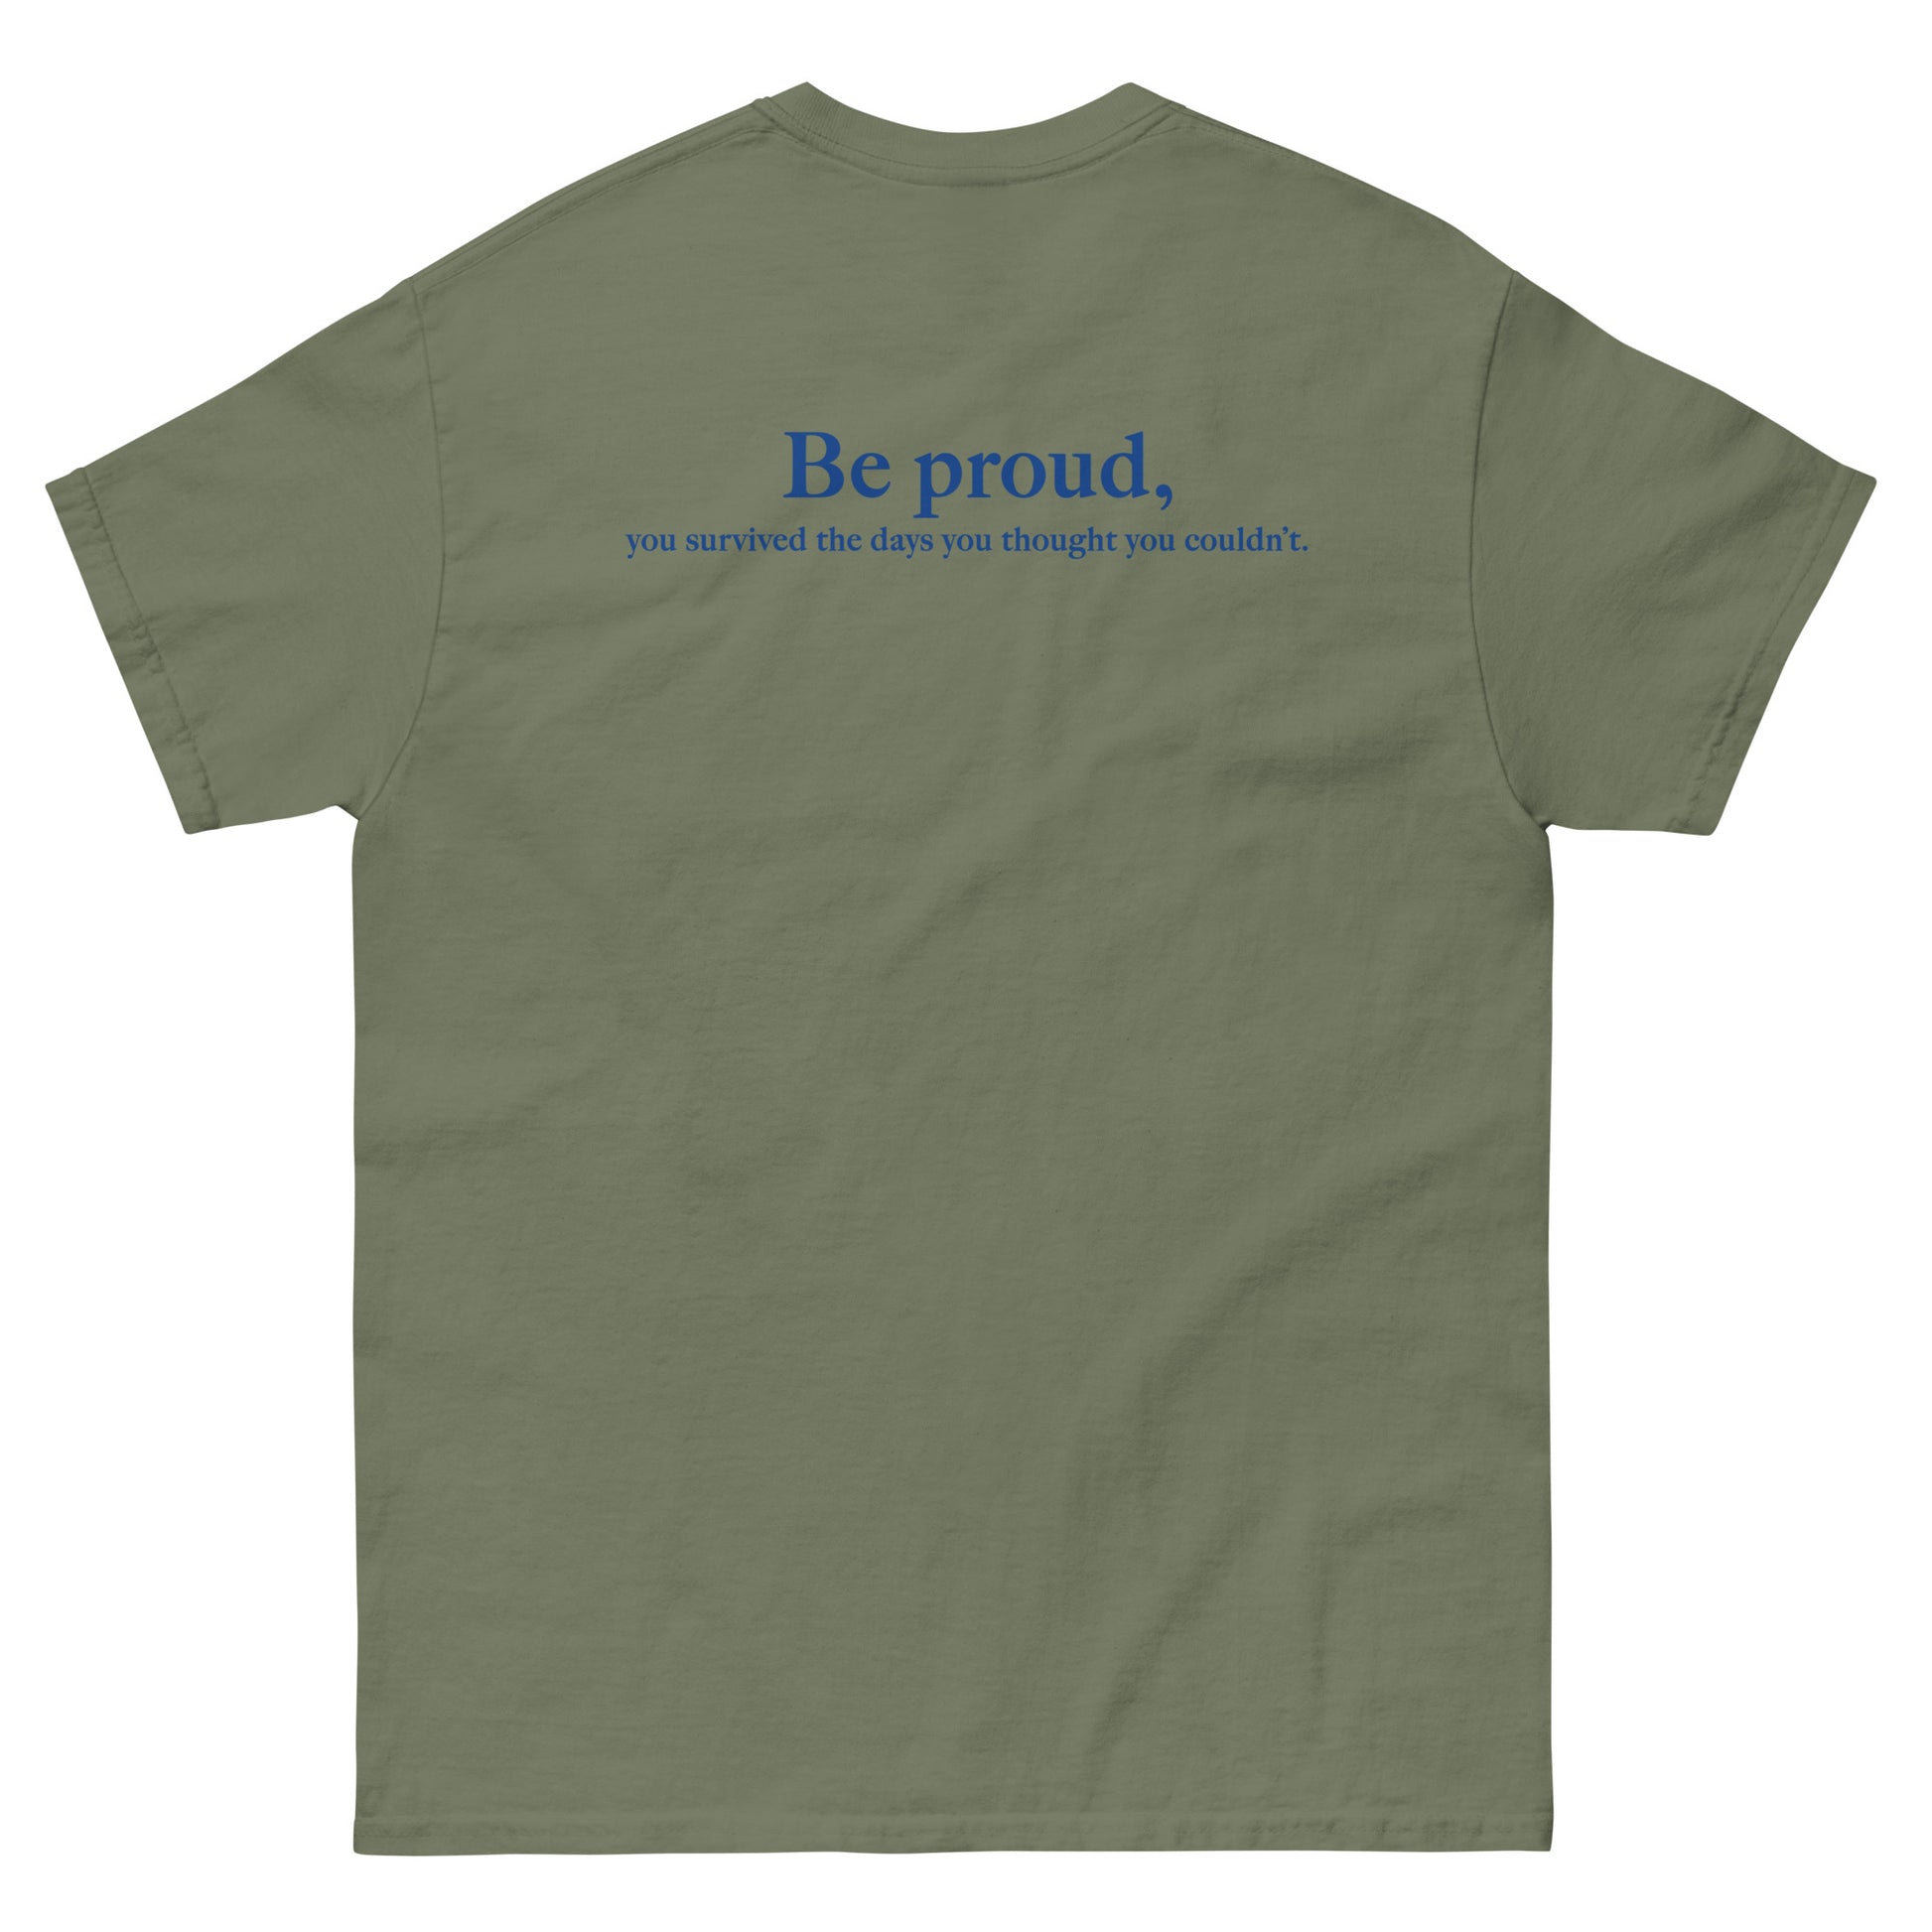 Green High Quality Tee - Front Design with "Be proud, " print on left chest - Back Design with a Phrase "Be proud, you survived the days you thought you couldn't." print